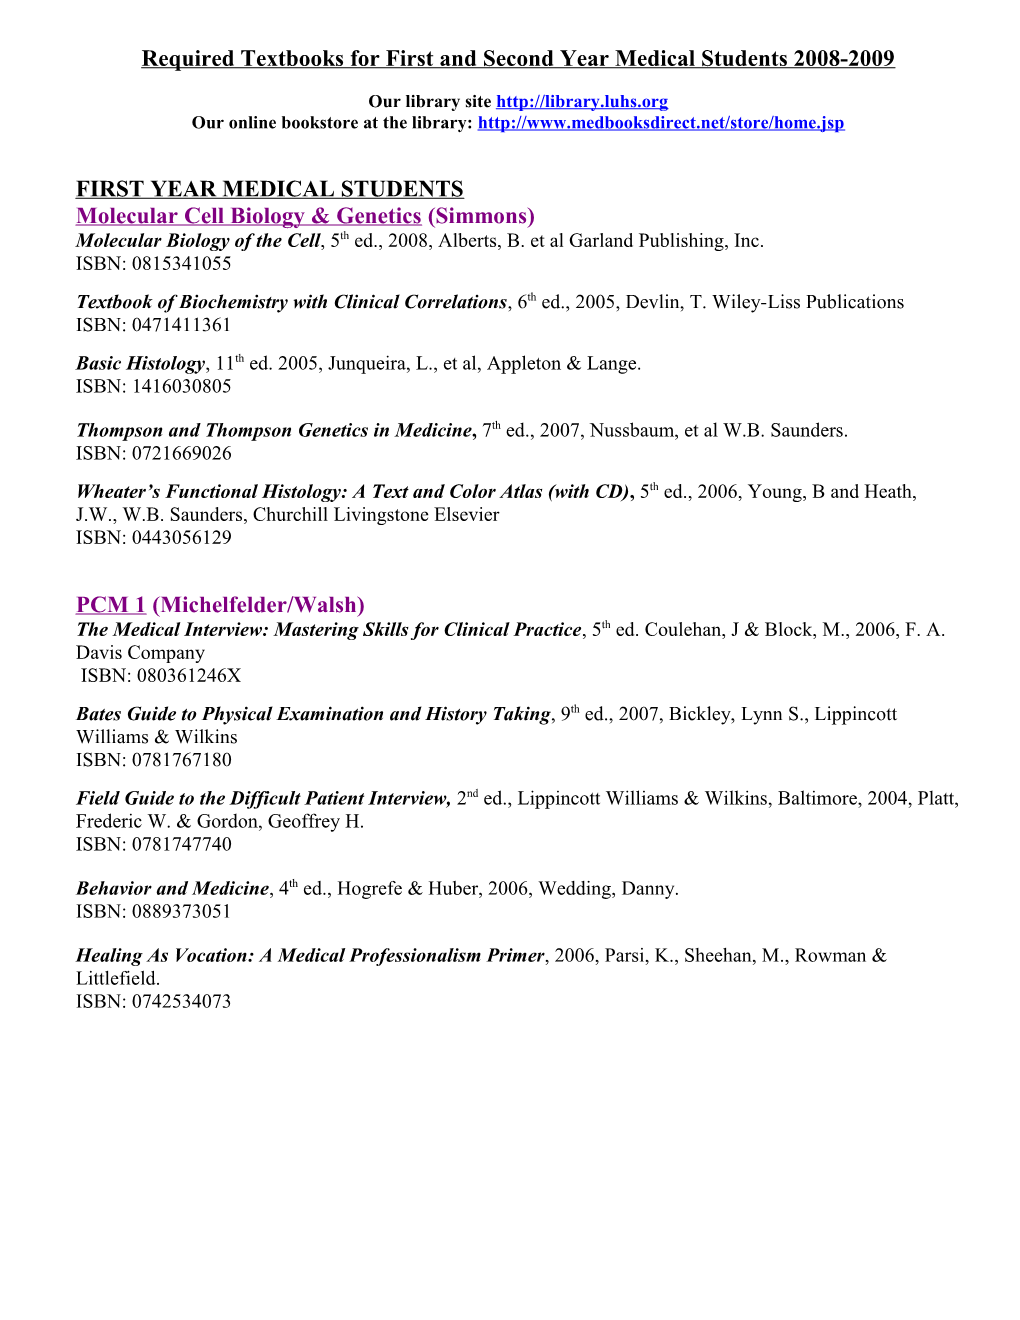 Required Textbooks for Second Year Medical Students 2005-2006